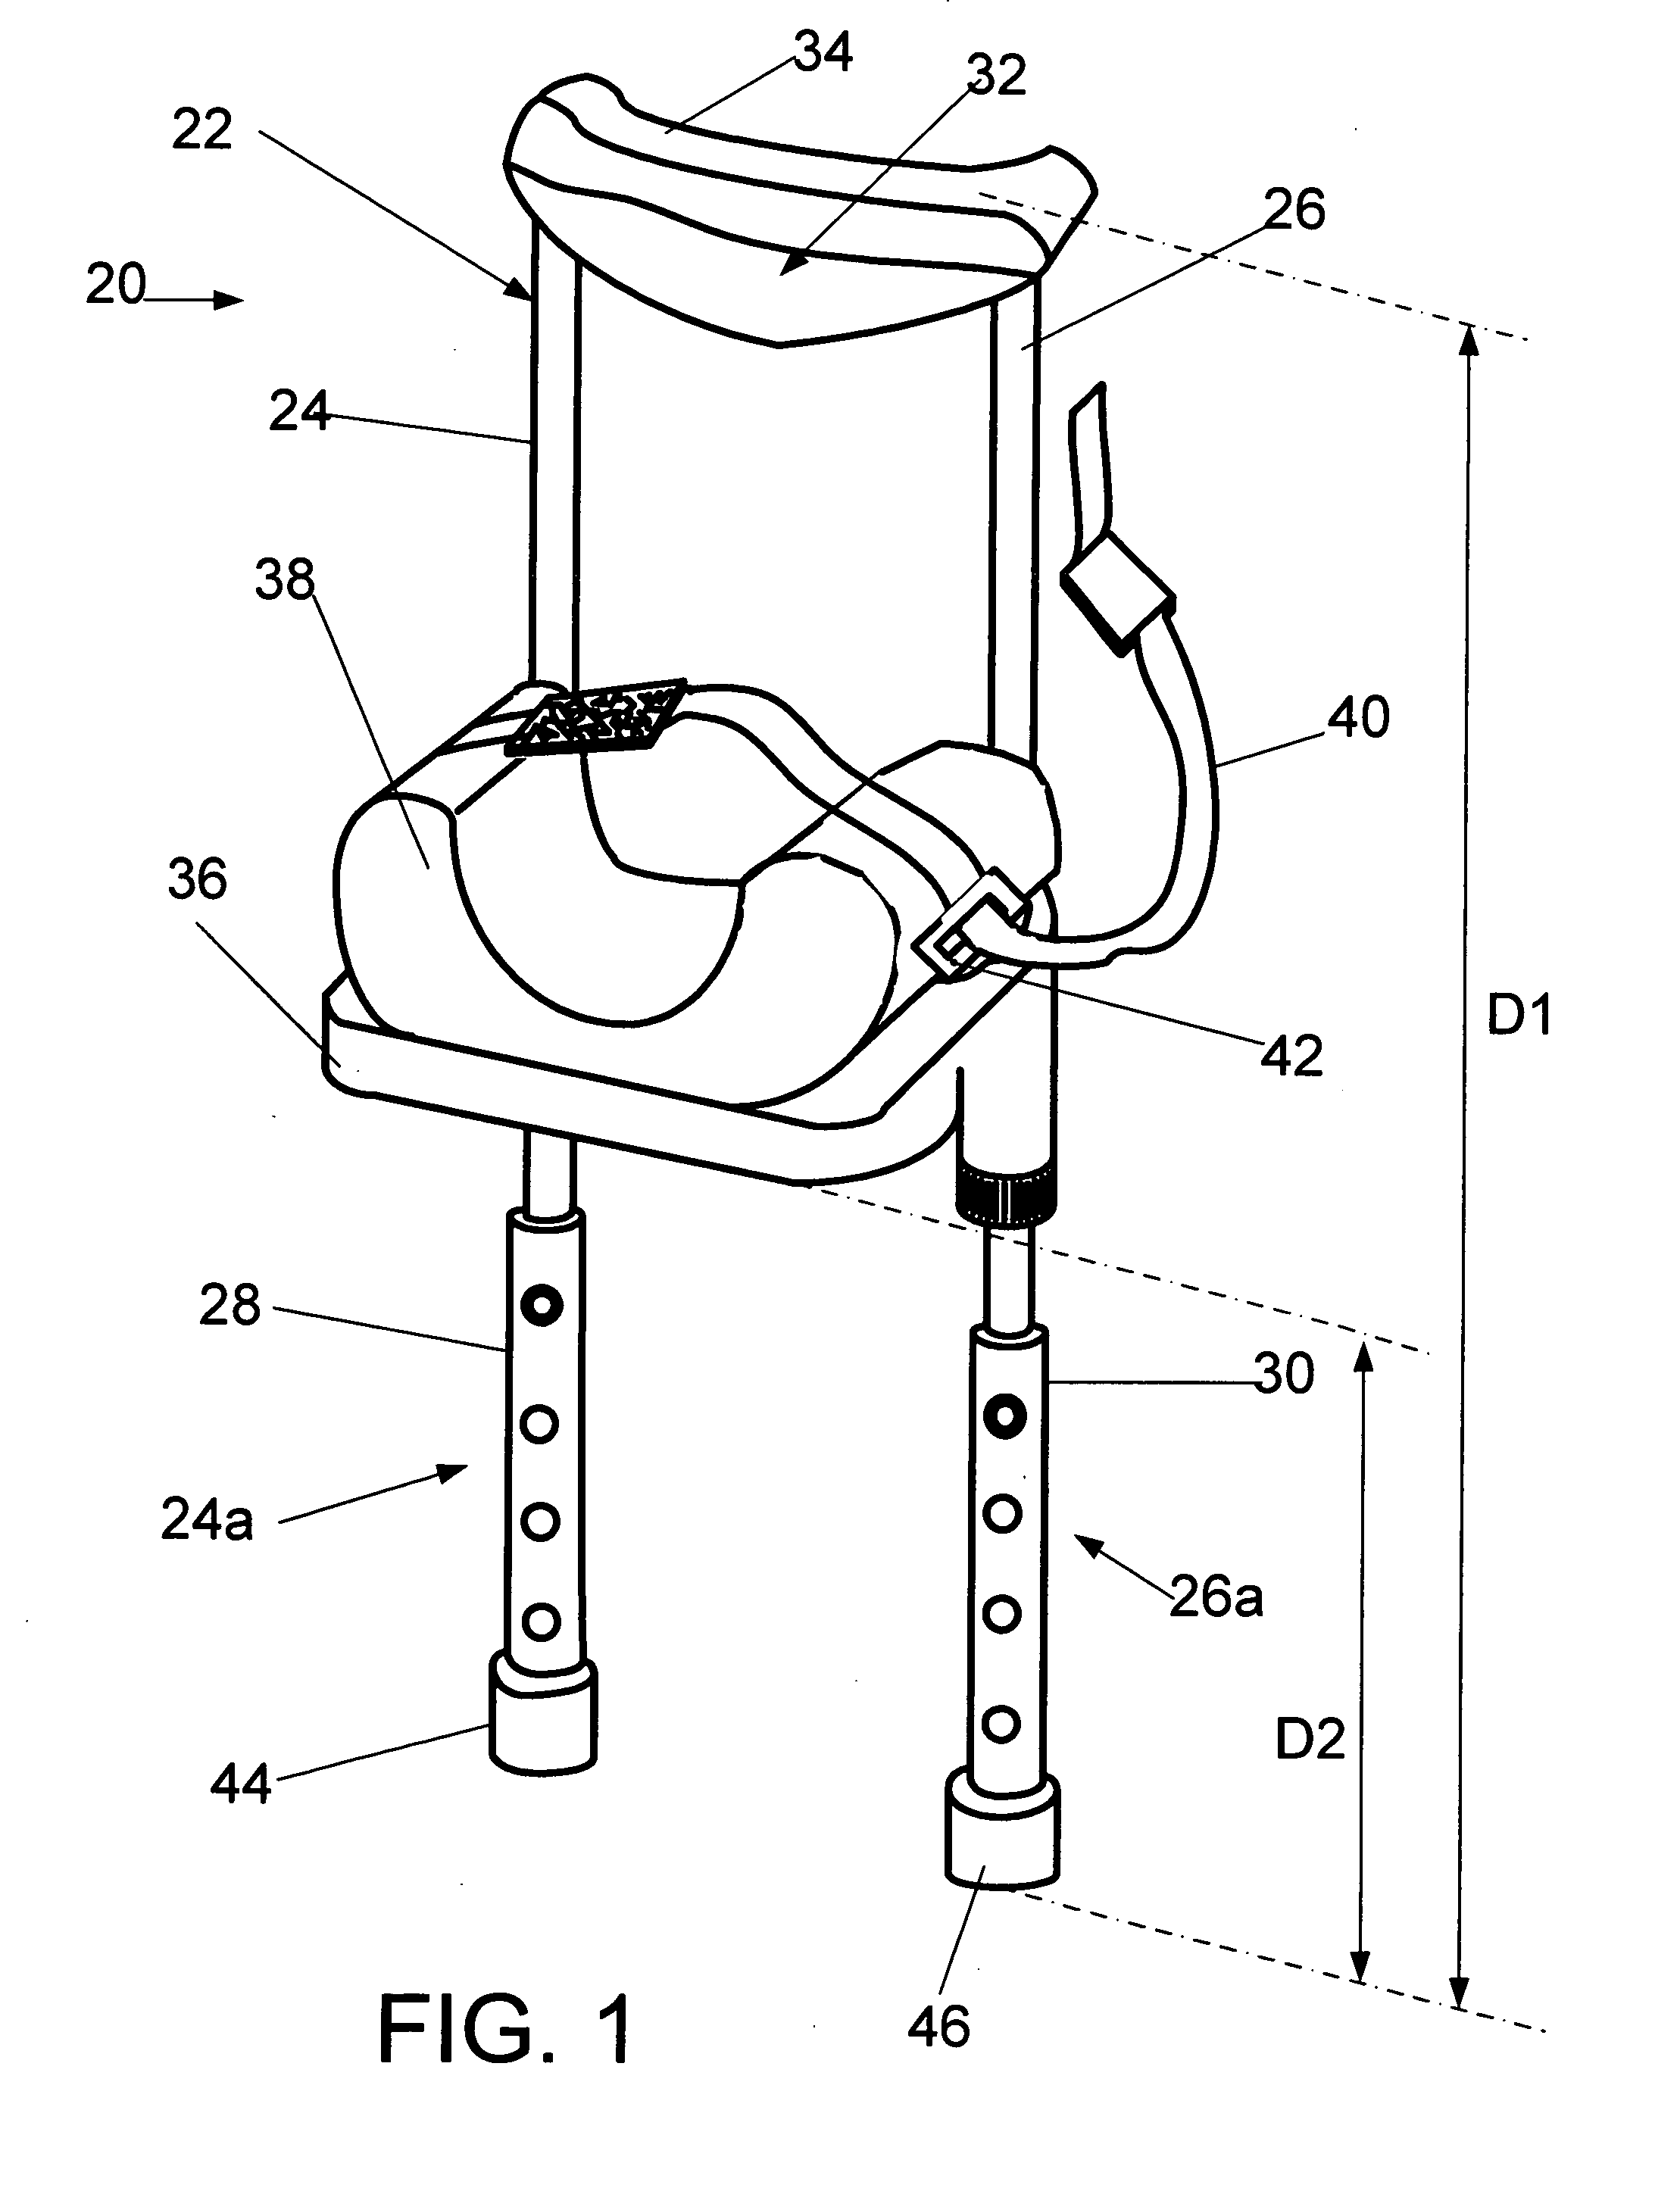 Mobility assist device and method for self-transfer between bed and wheelchair